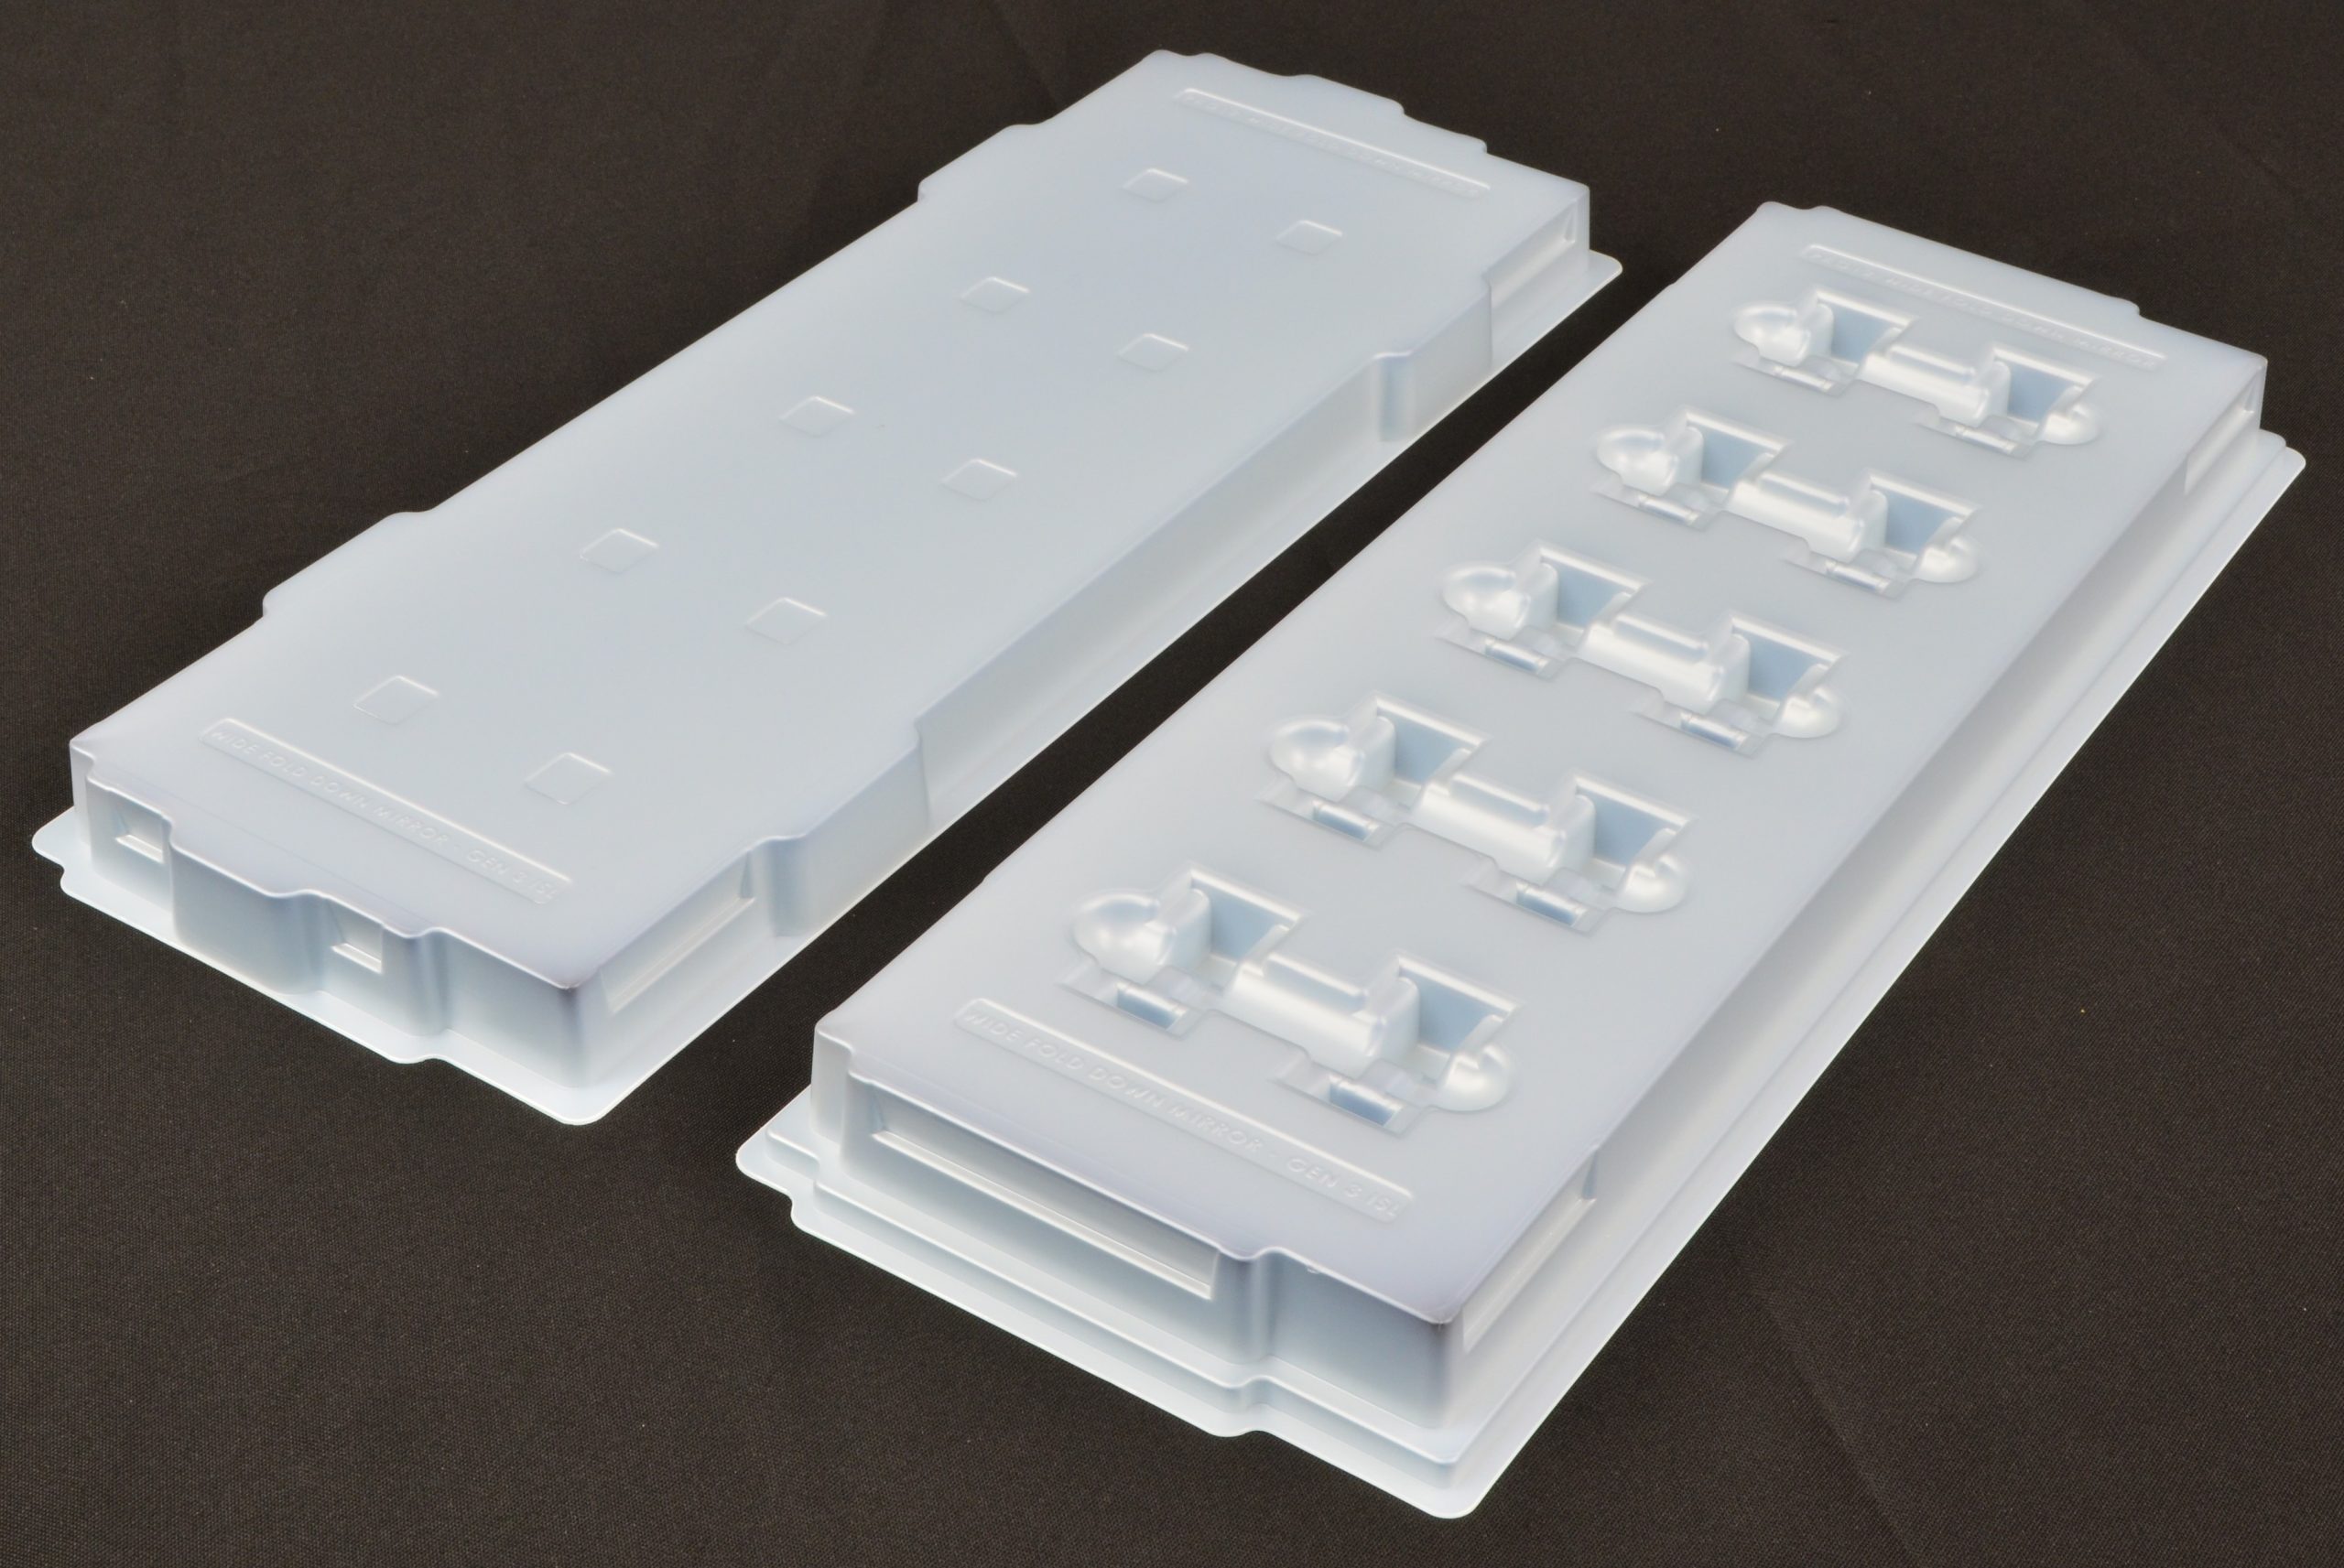  Thermoformed dissipative S680 IPA cleanable tray and cover set for small devices